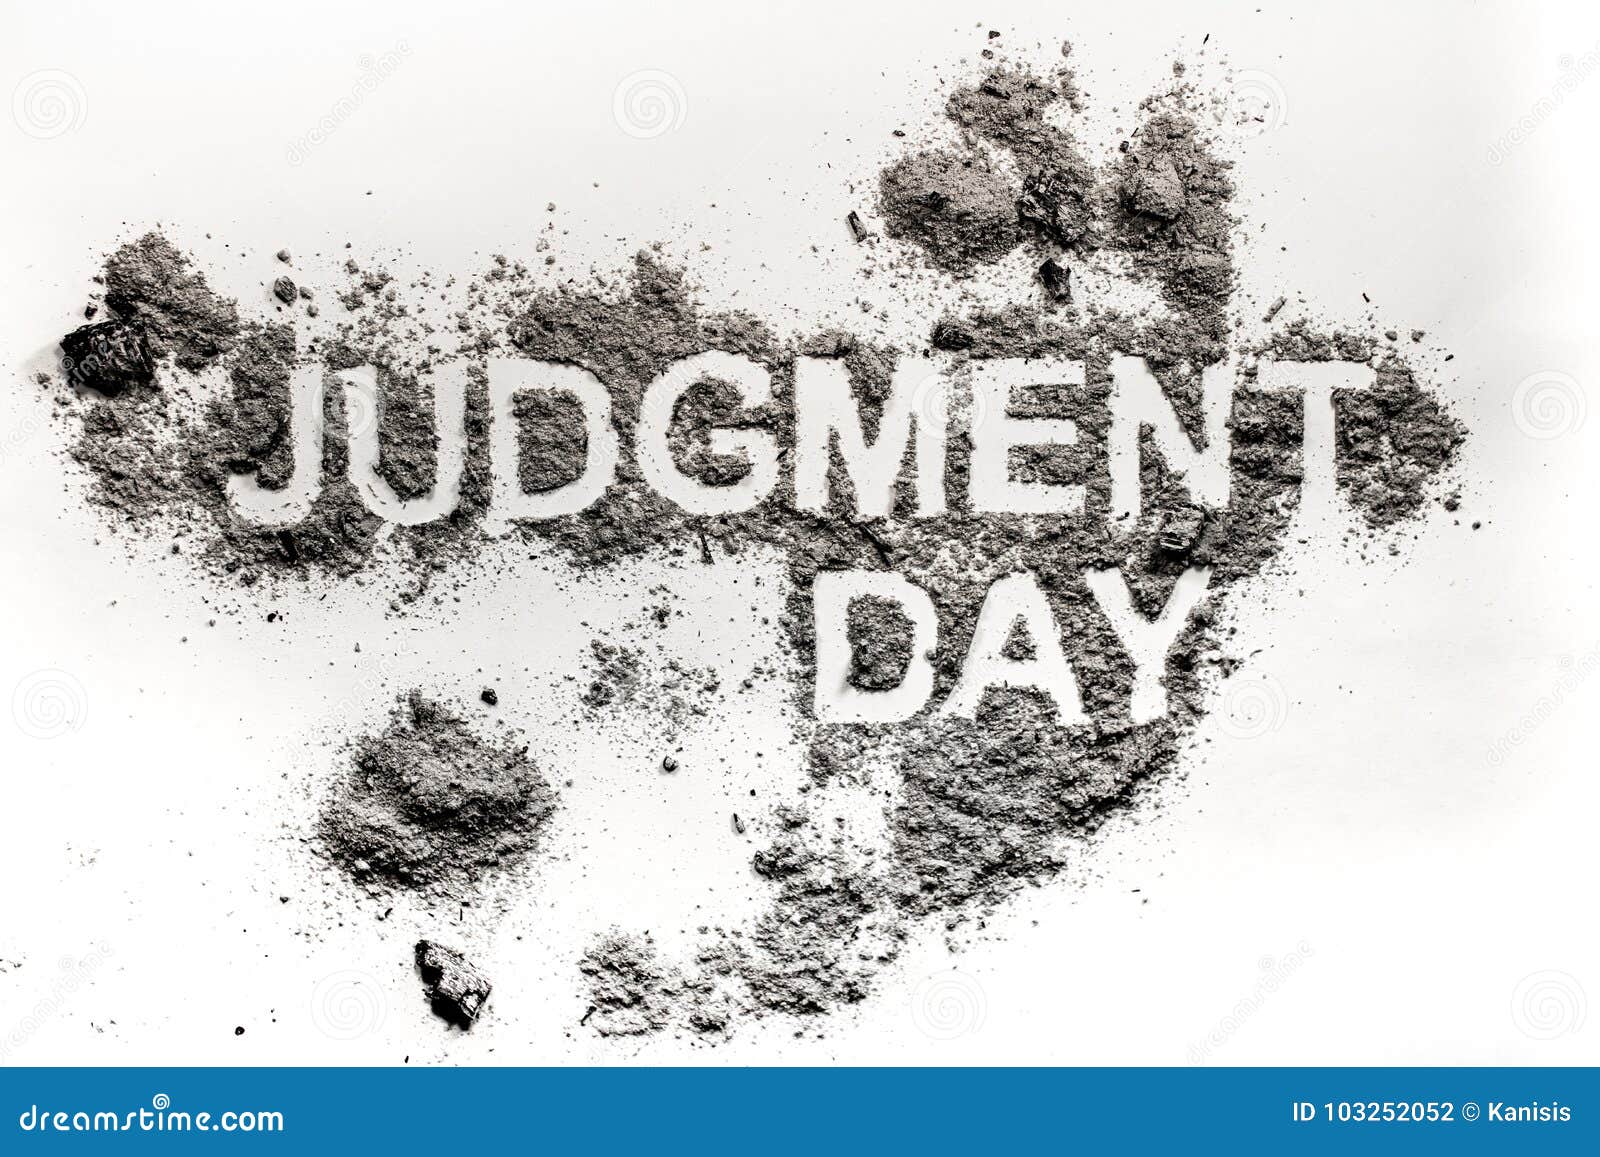 judgment day word as apocalypse, catastrophe or cataclysm